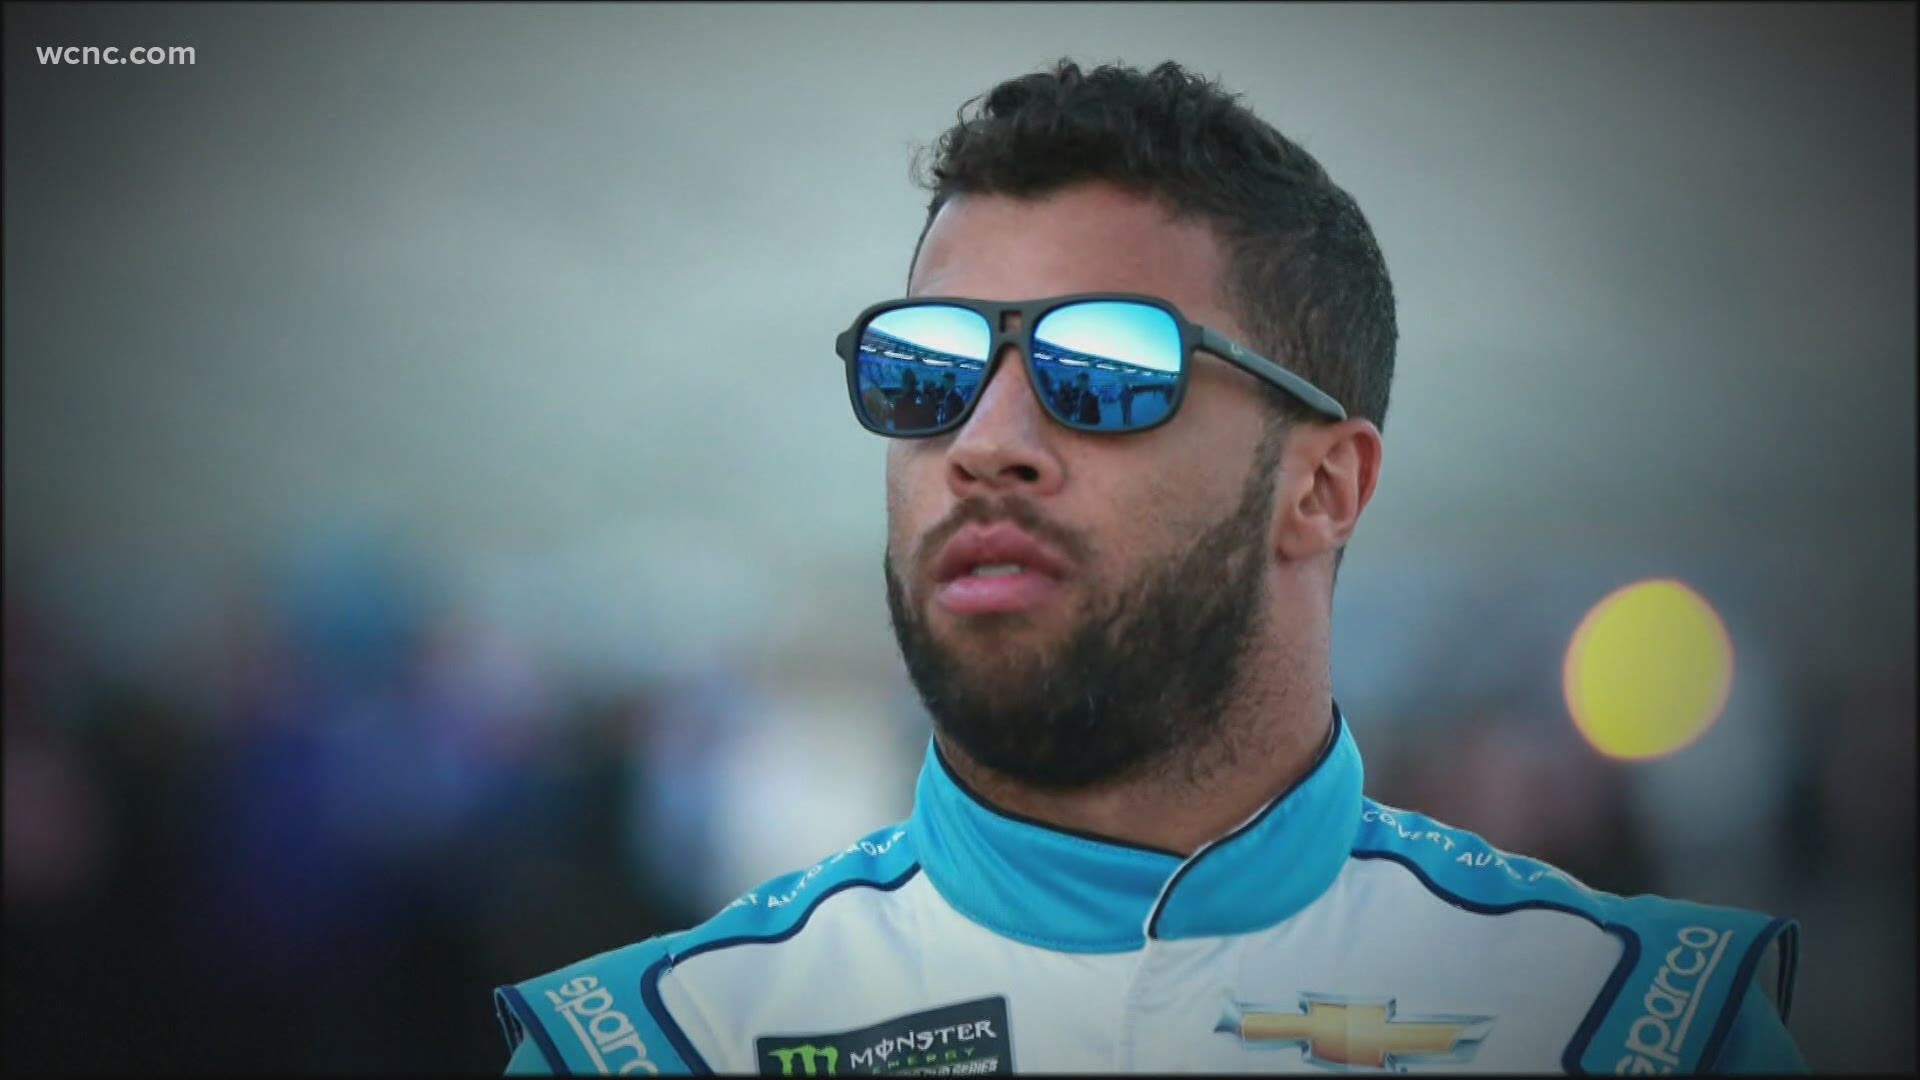 This past summer, NASCAR banned Confederate flags and hired the sport's first-ever vice president of diversity and inclusion, Brandon Thompson.